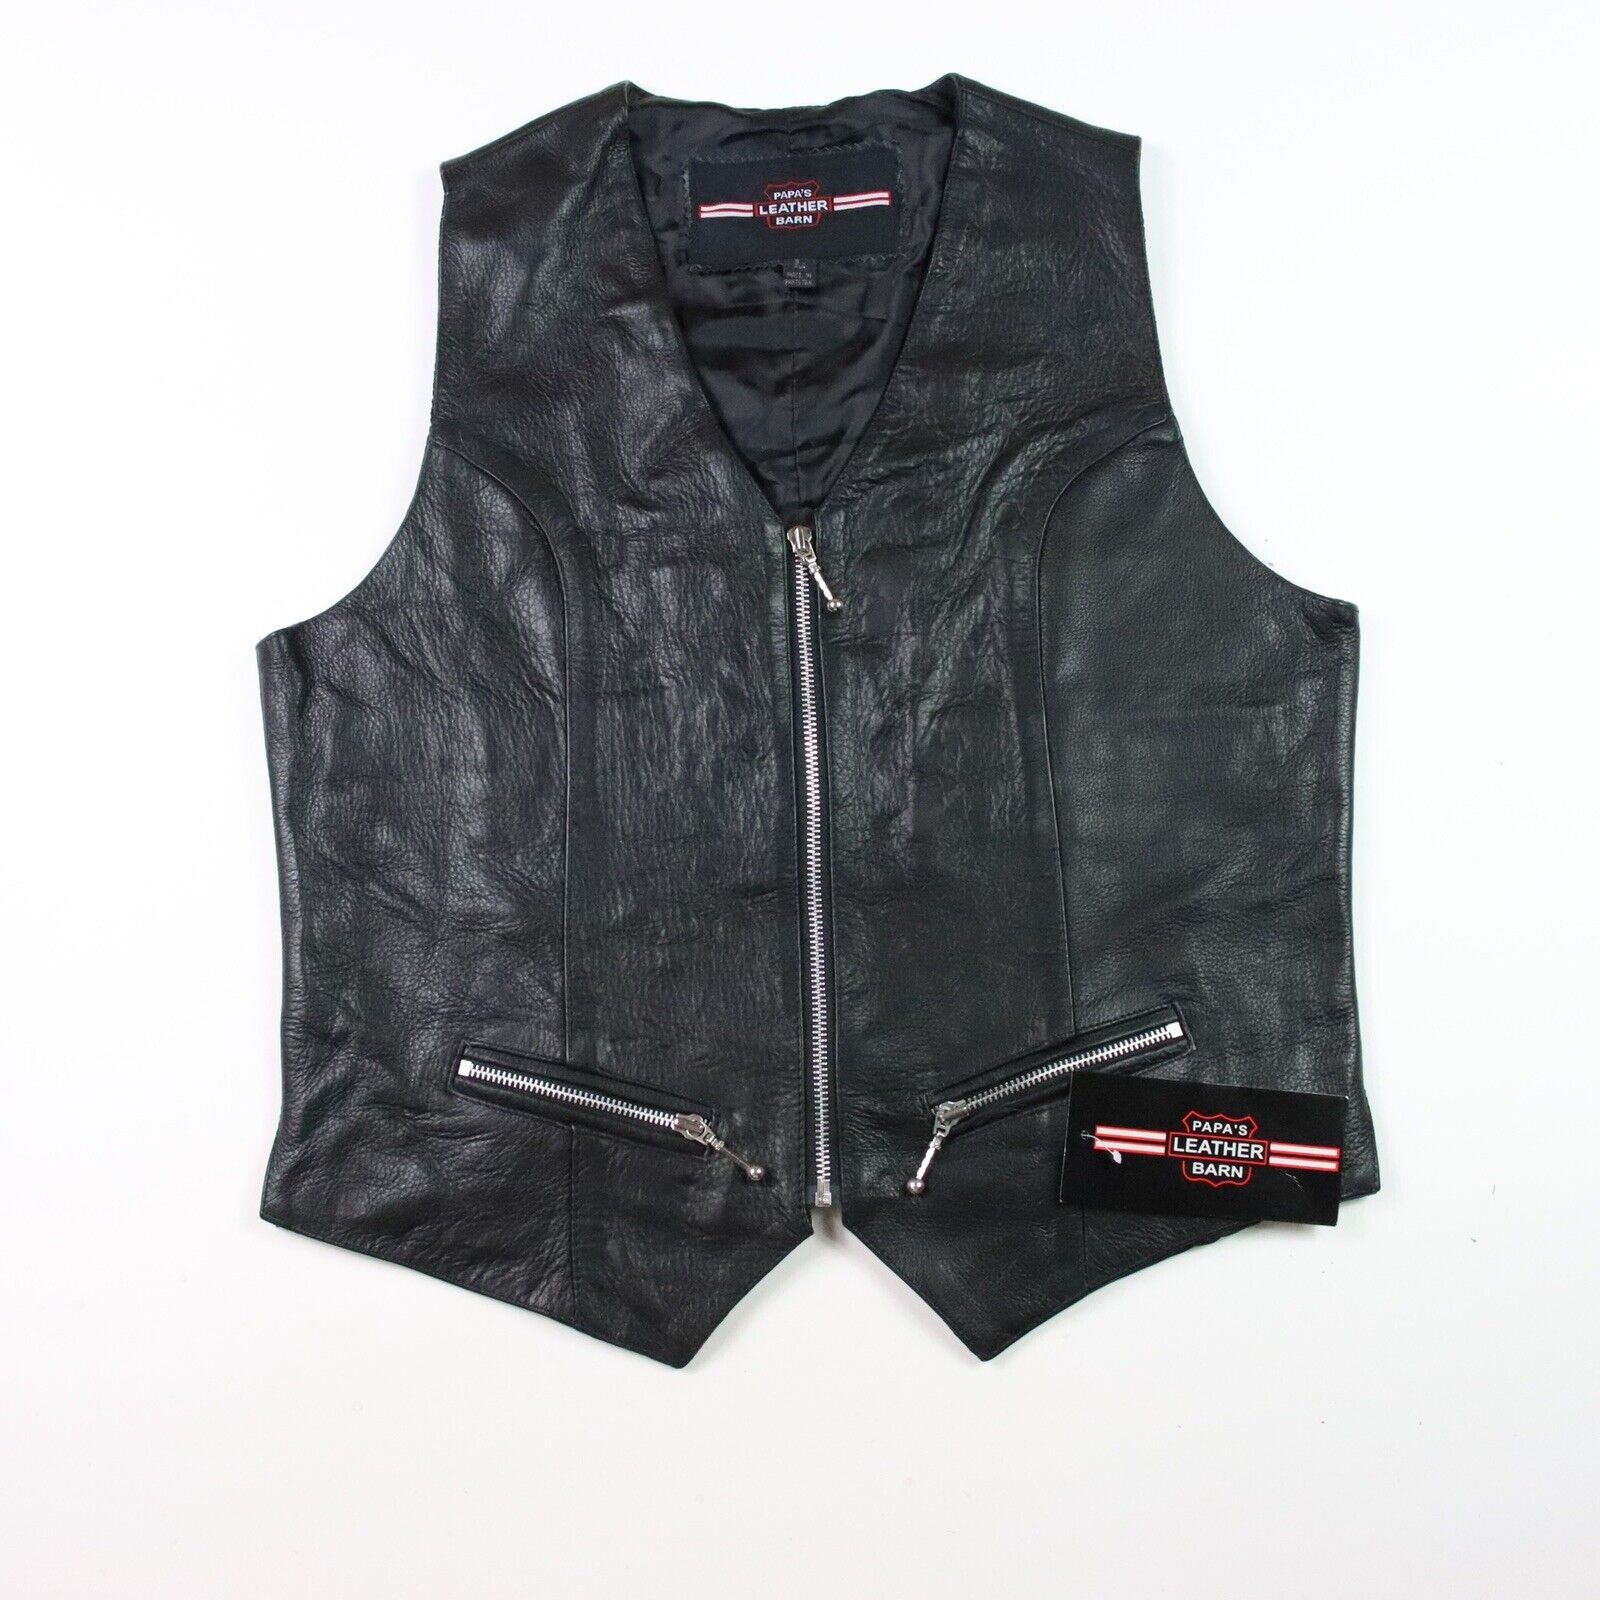 Genuine Leather Motorcycle Vest Papa’s Leather Barn Size Large